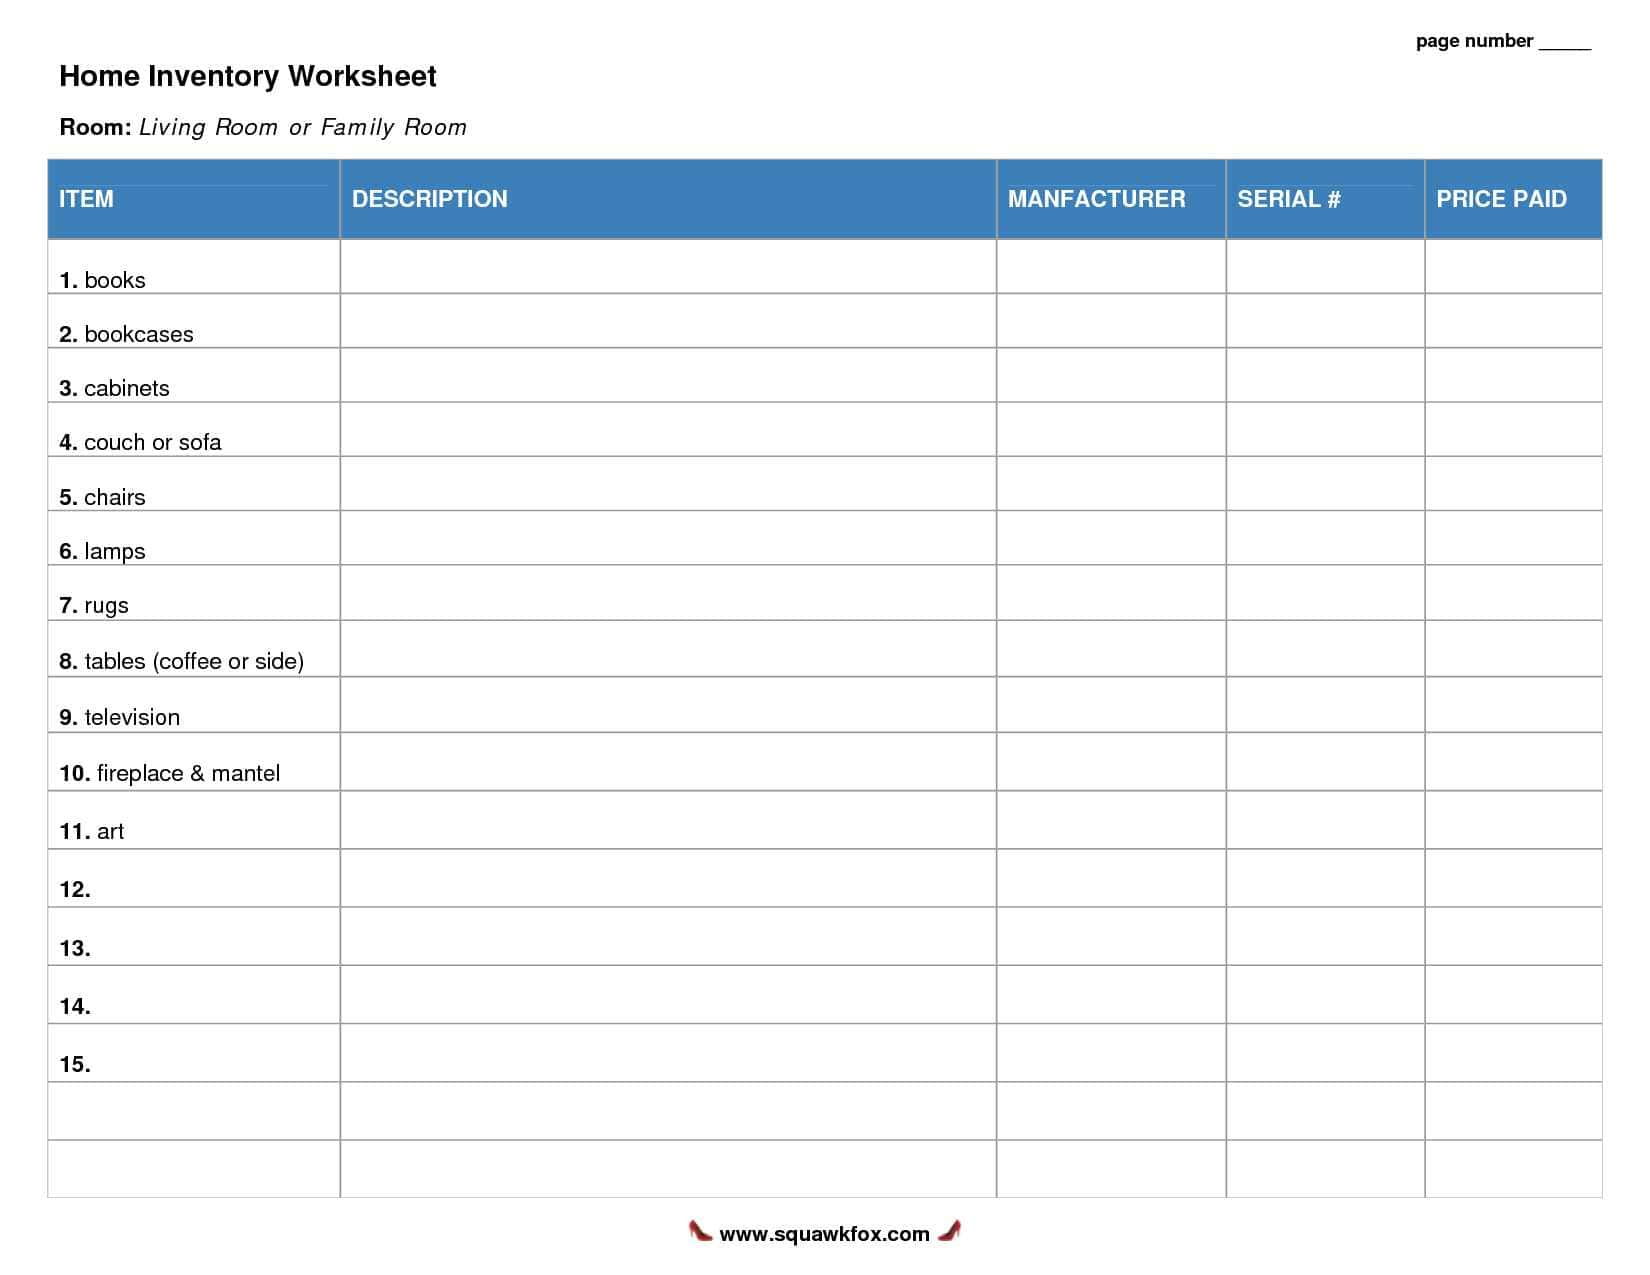 Cigarette Inventory Spreadsheet Throughout Printable Cigarette Inventory Sheets And Cigarette Inventory